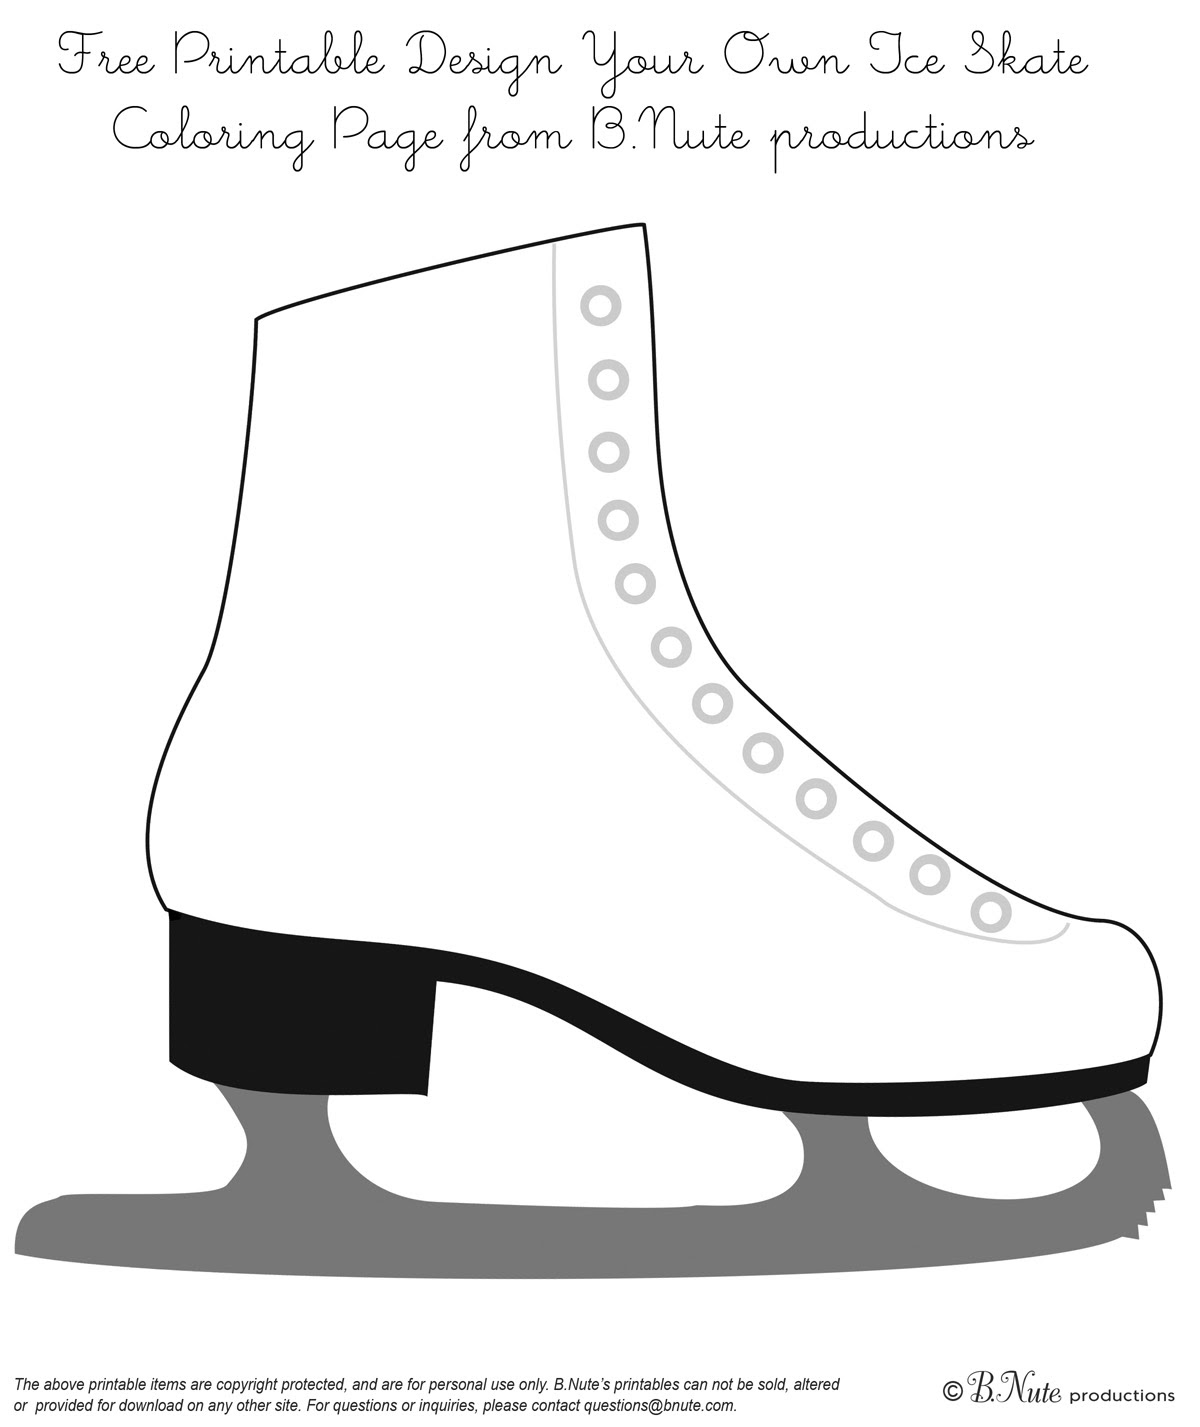 bnute-productions-free-printable-coloring-page-design-your-own-ice-skate